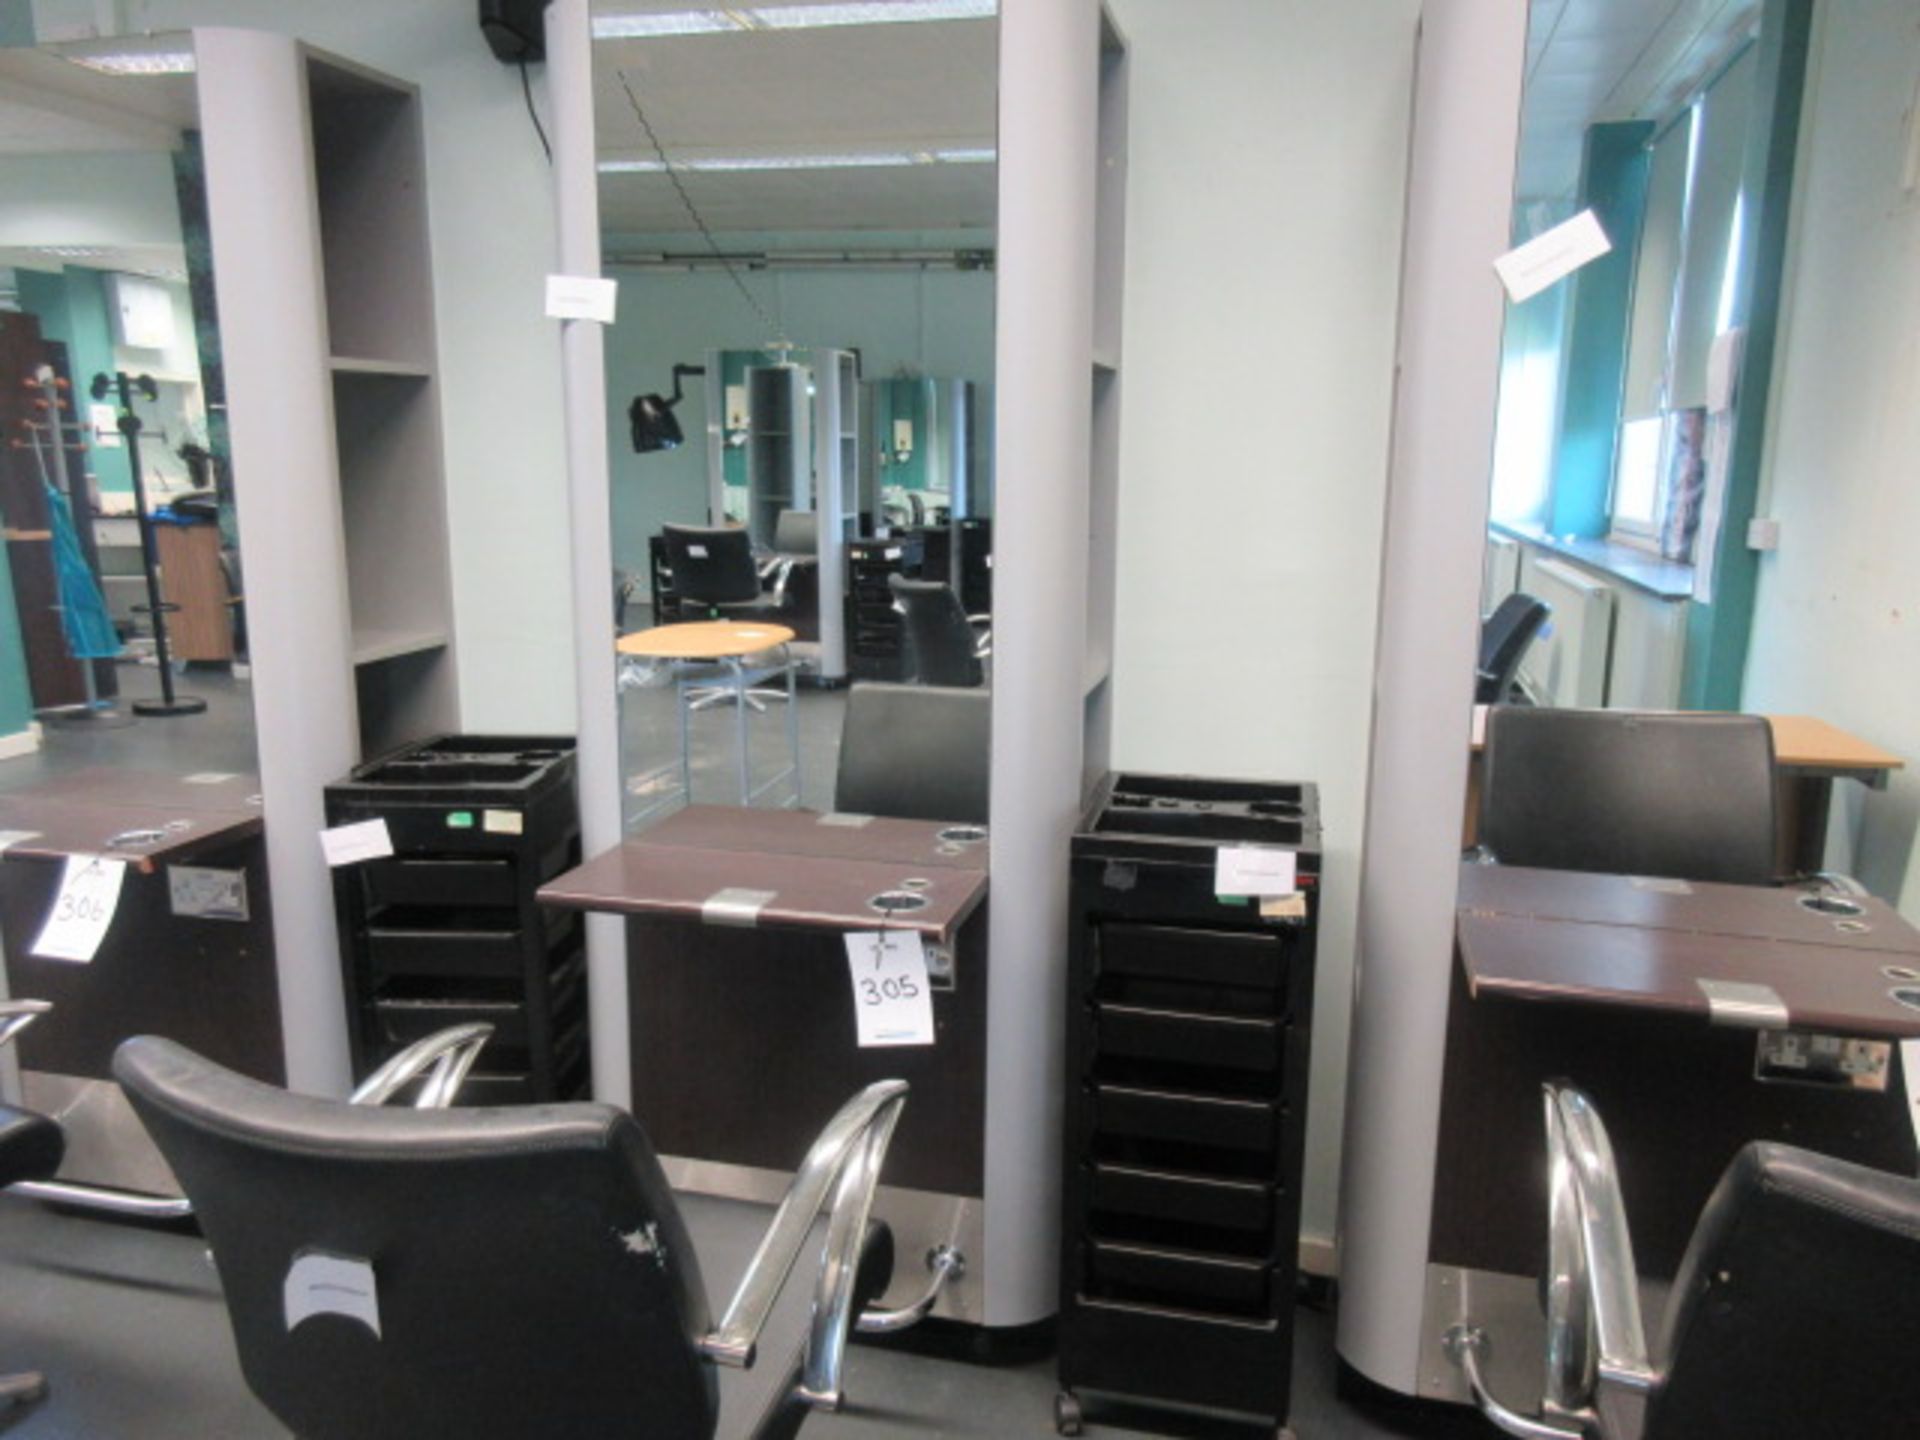 Salon Hair Stylist Back to Wall Mirror Frame. Double electric socket. Chair. Accessory trolley